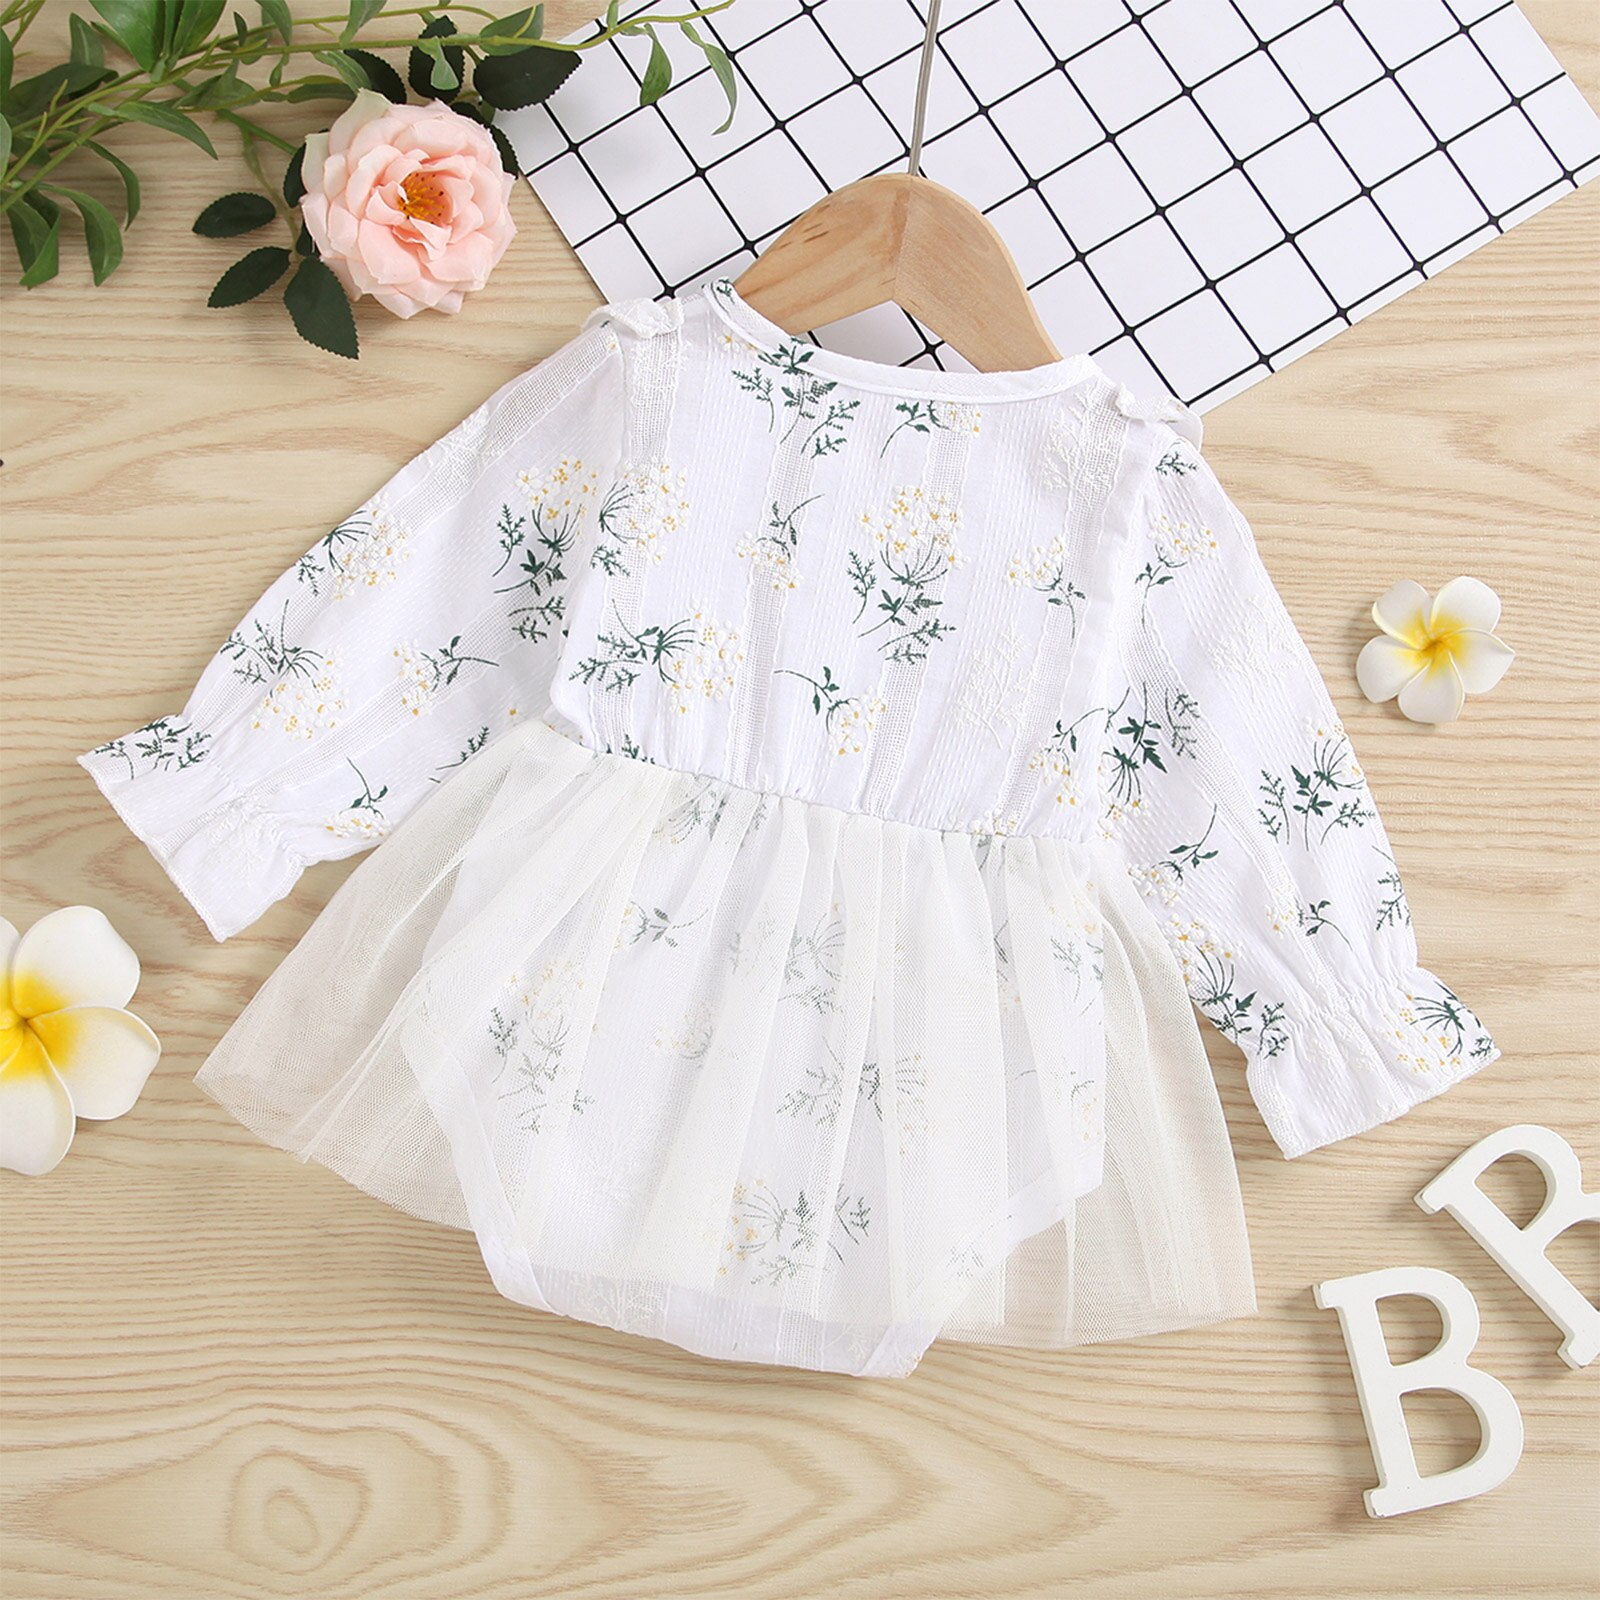 Ma-Baby-0-18M-Infant-Newborn-Baby-Girls-Rompers-Lace-Floral-Jumpsuit-Playsuit-Outfits-Autumn-Spring-1